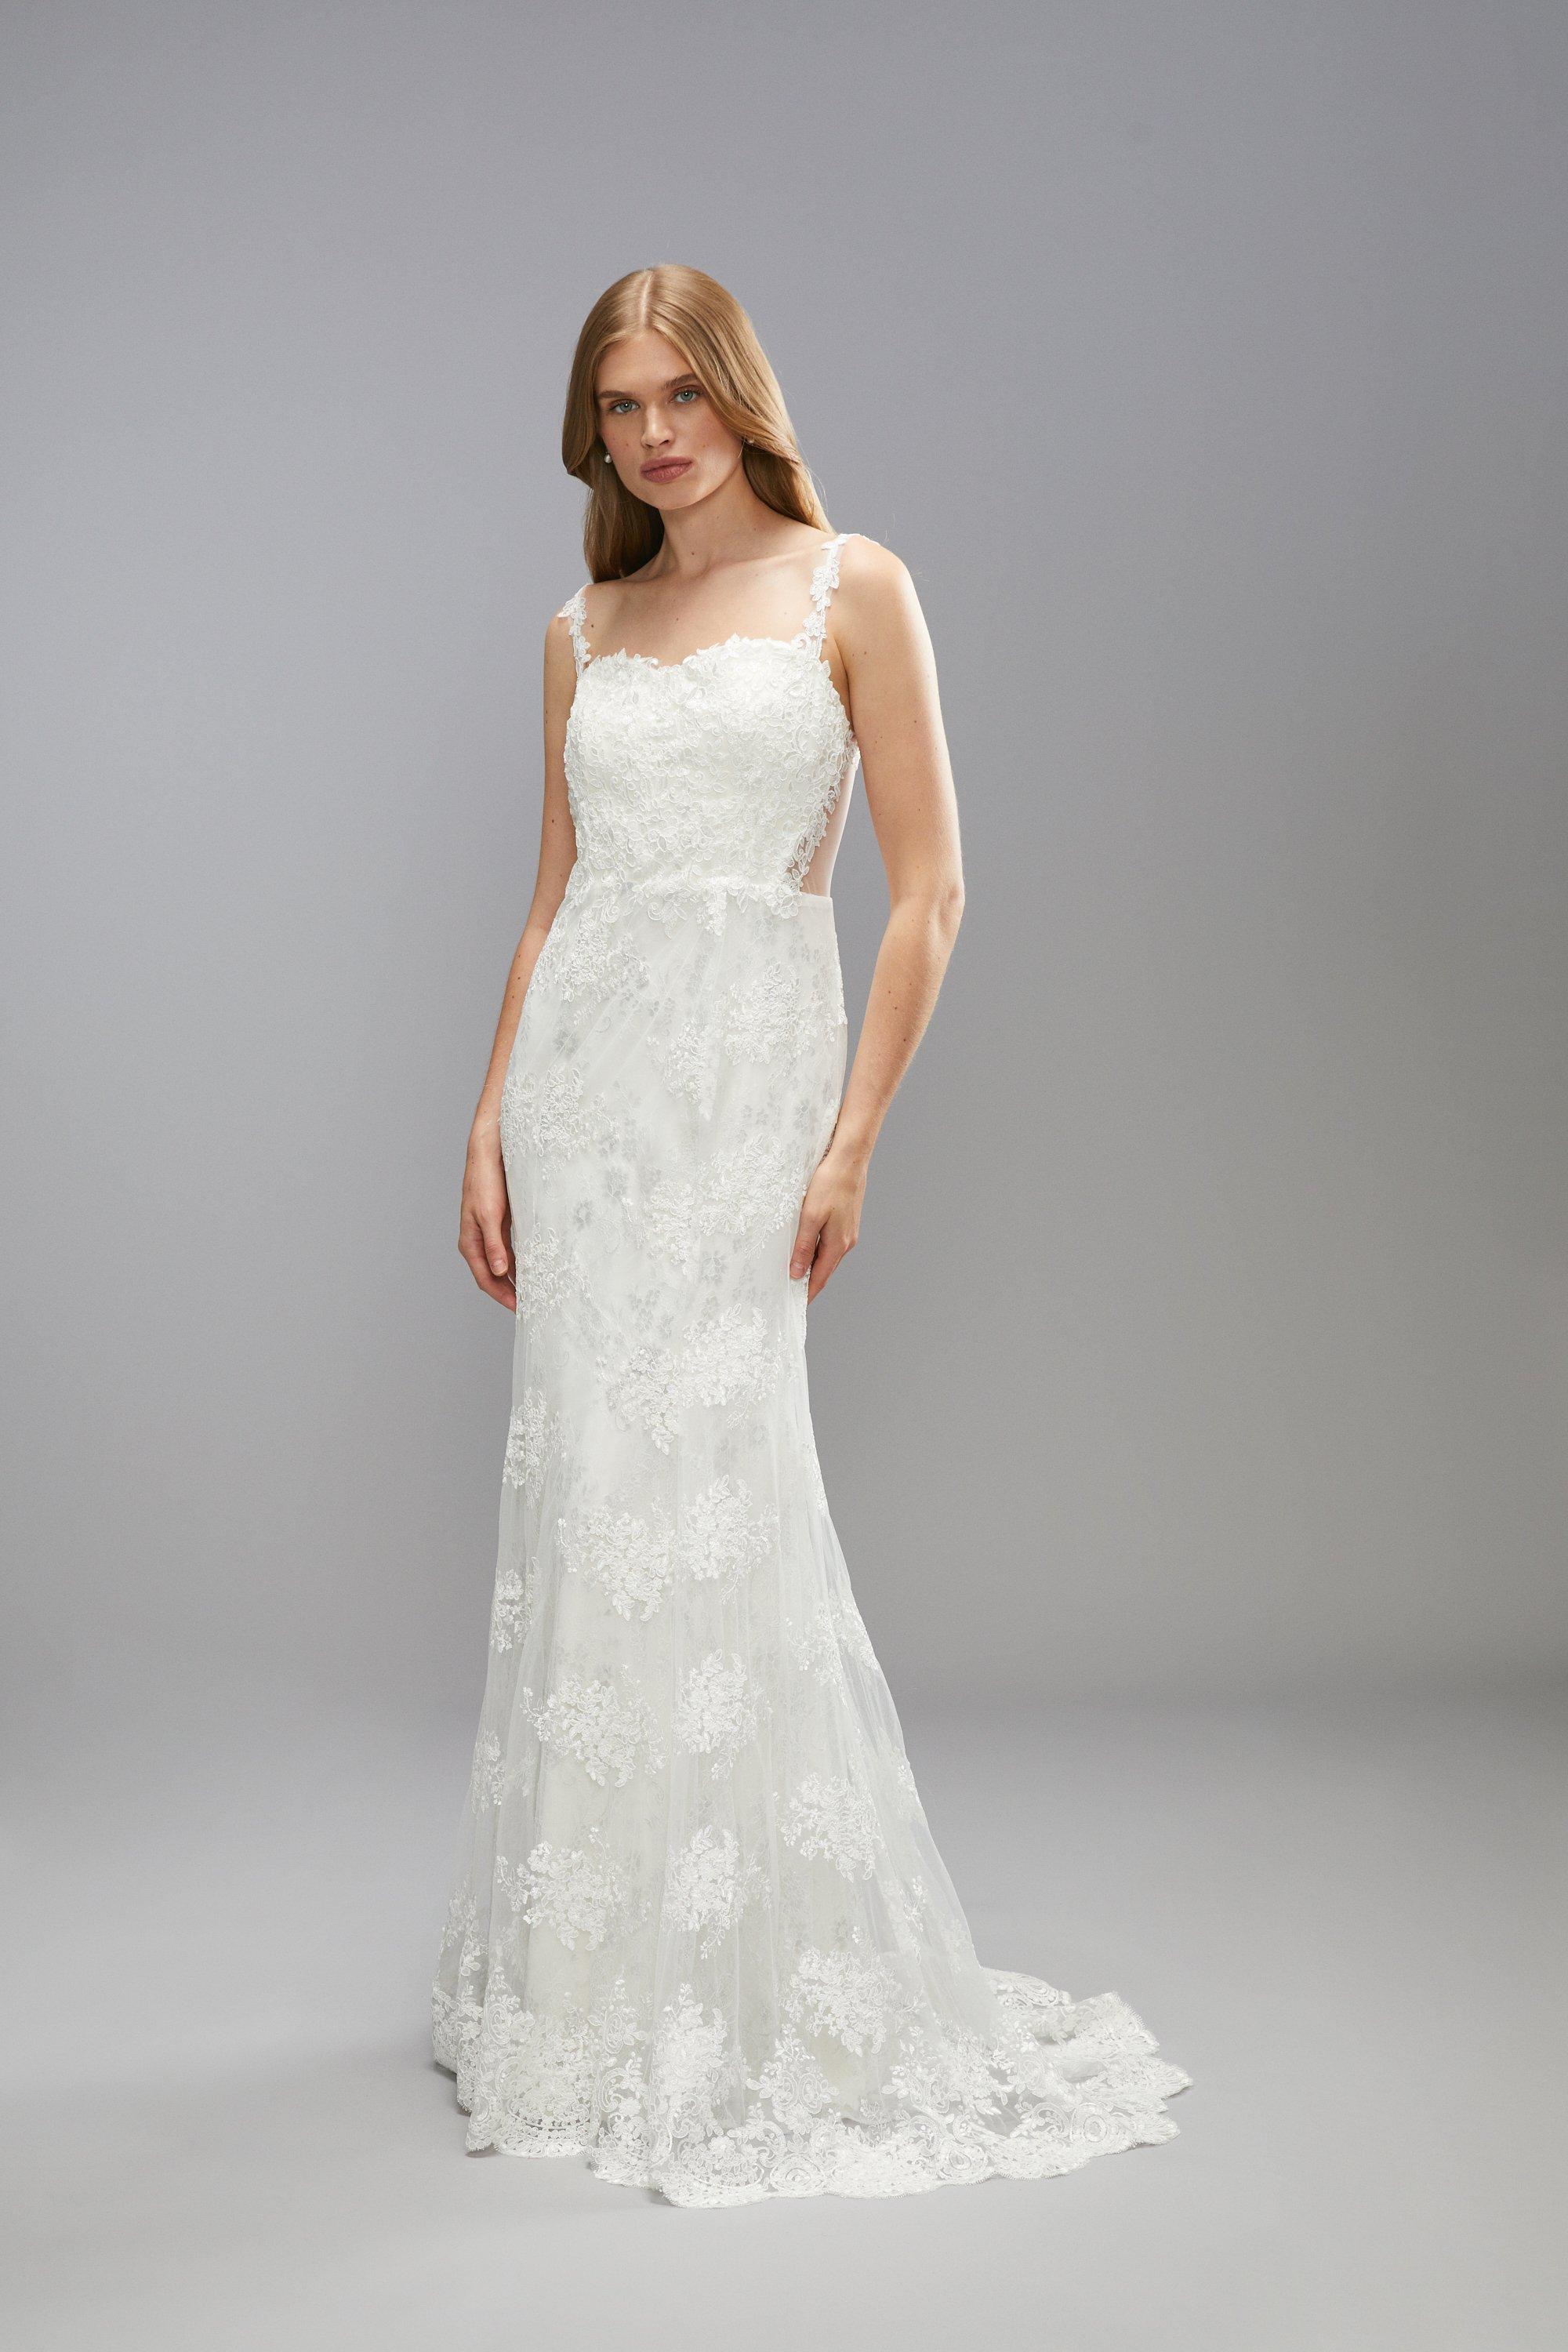 Premium Sweetheart Lace Applique Strappy Wedding Dress